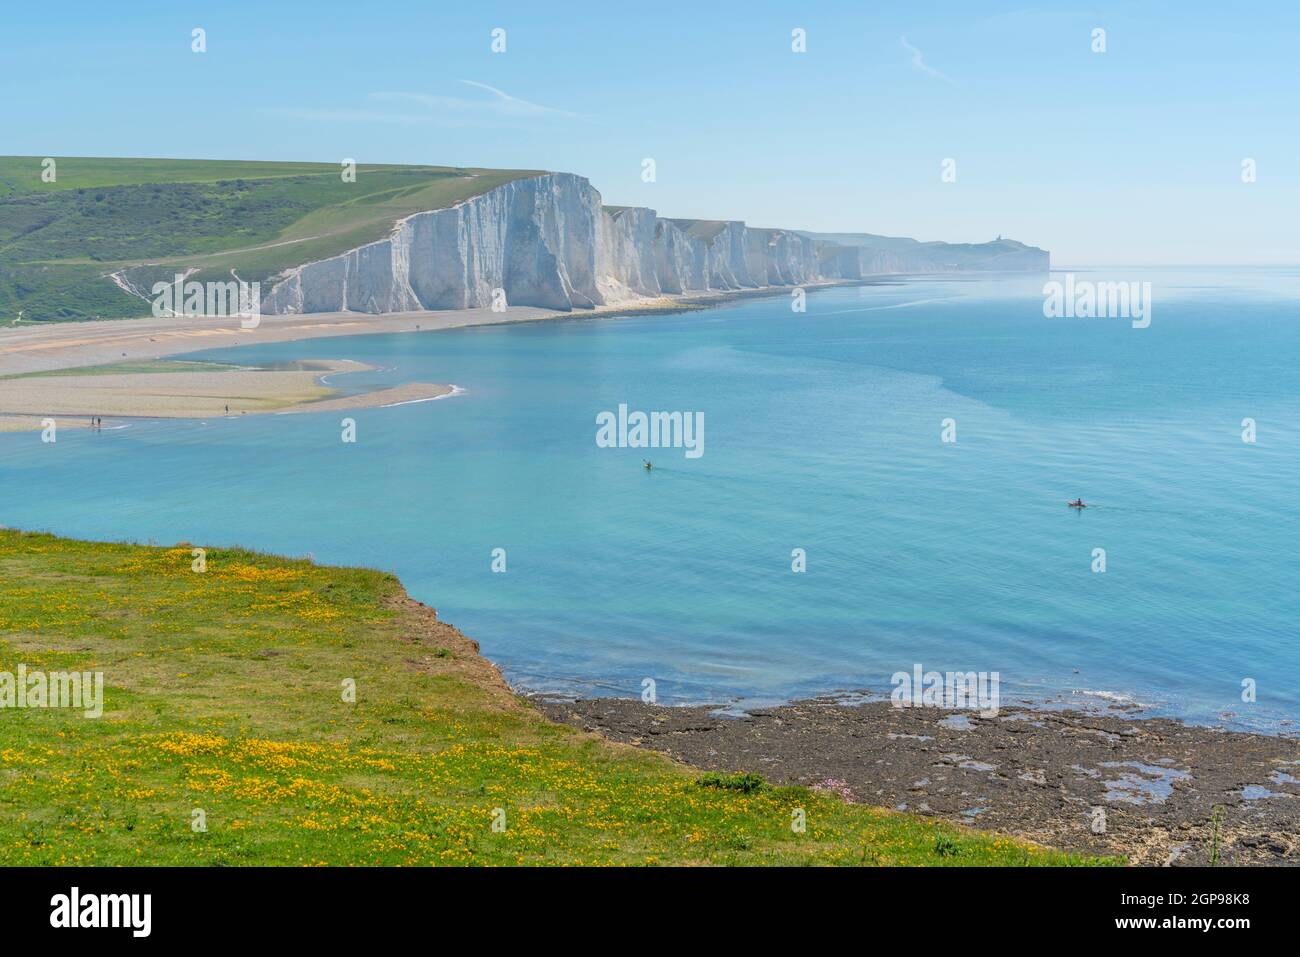 Seven Sisters Chalk Cliffs and summer wild flowers at Cuckmere Haven, South Downs National Park, East Sussex, England, United Kingdom, Europe Stock Photo